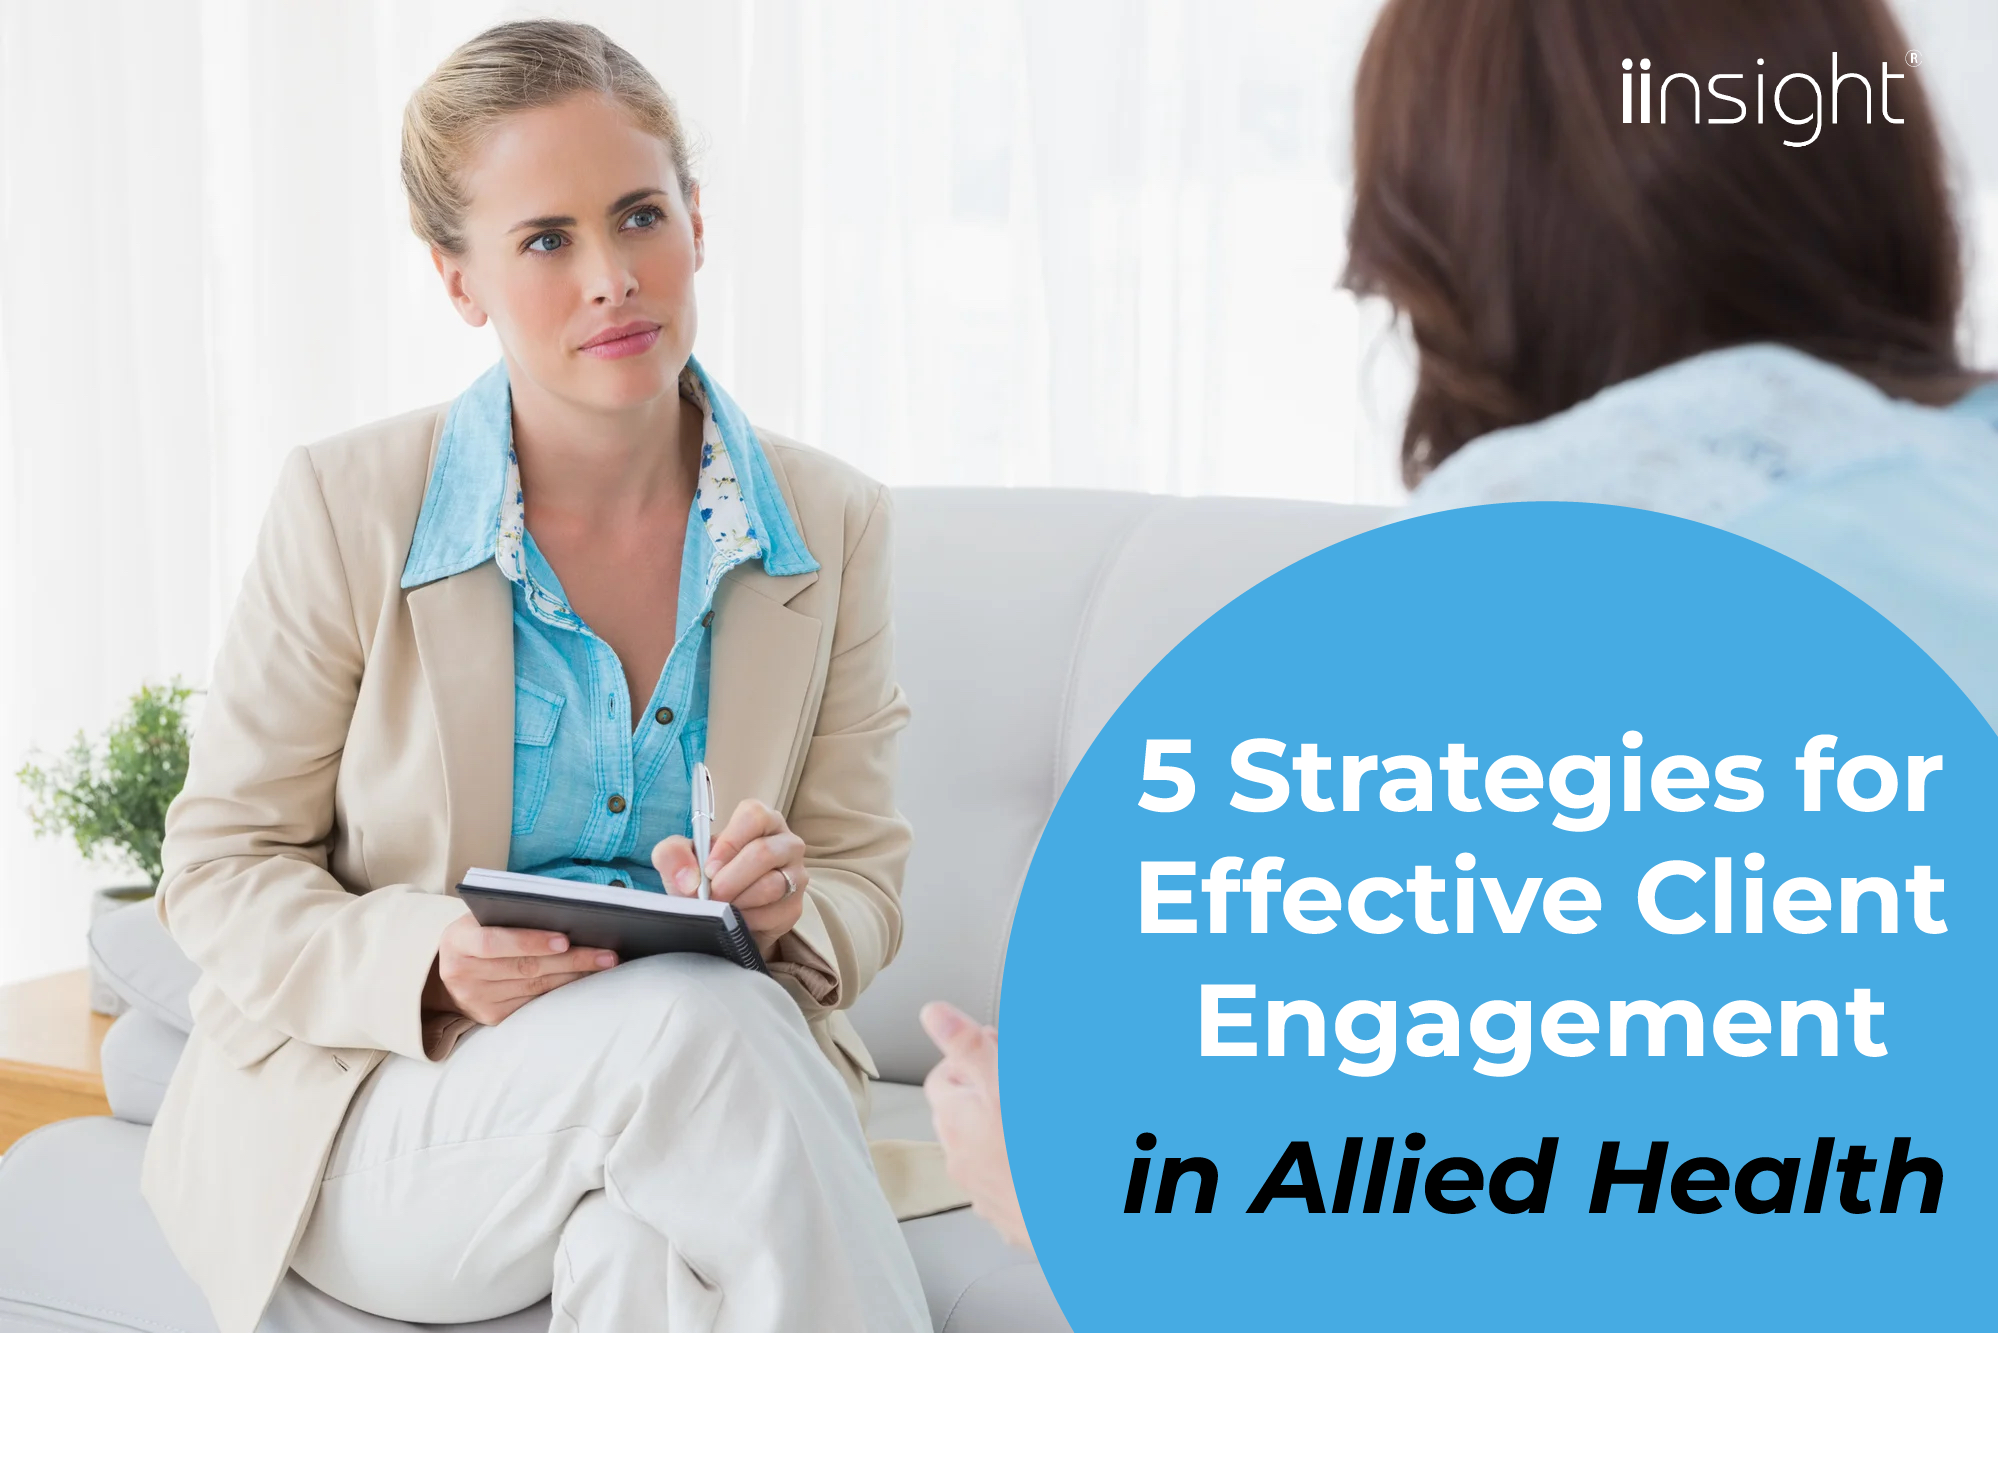 5 Strategies for Effective Client Engagement in Allied Health